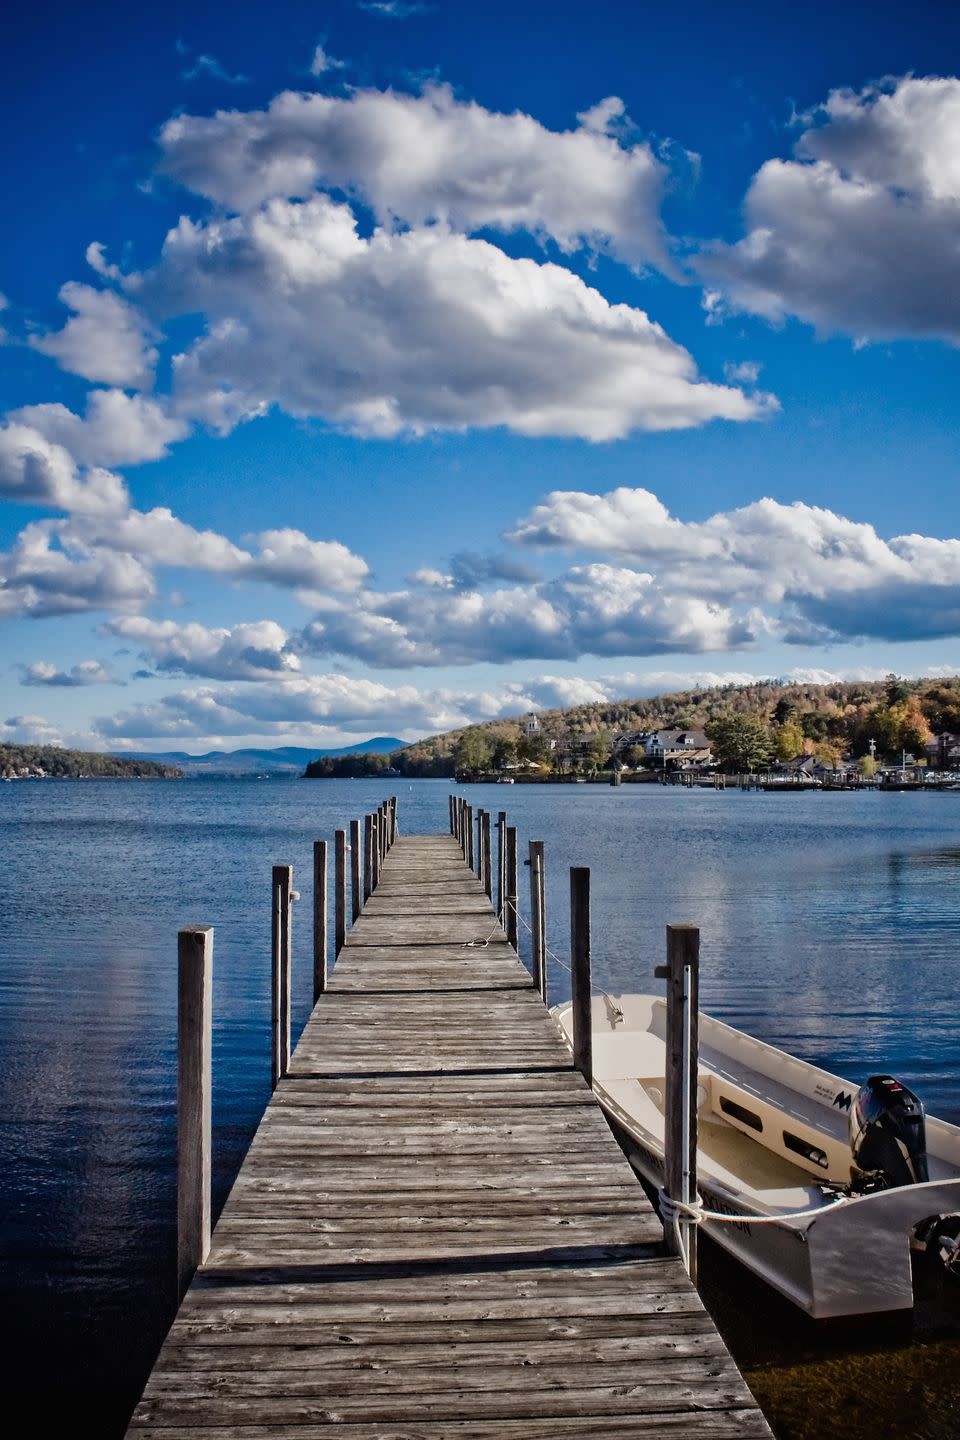 <p>Life revolves around the mirror-like Lake Winnipesaukee in this laid-back town. Resorts dot the shores, giving residents a good excuse to play tourist for the day. However, the most fun way to explore might be the <a href="http://www.hoborr.com/winni.html" rel="nofollow noopener" target="_blank" data-ylk="slk:Winnipesaukee Scenic Railroad" class="link ">Winnipesaukee Scenic Railroad</a>.</p><p><a href="https://www.housebeautiful.com/design-inspiration/celebrity-homes/a5286/bette-davis-butternut-farm/" rel="nofollow noopener" target="_blank" data-ylk="slk:Rent Bette Davis' New Hampshire farm »" class="link "><em>Rent Bette Davis' New Hampshire farm »</em></a></p>